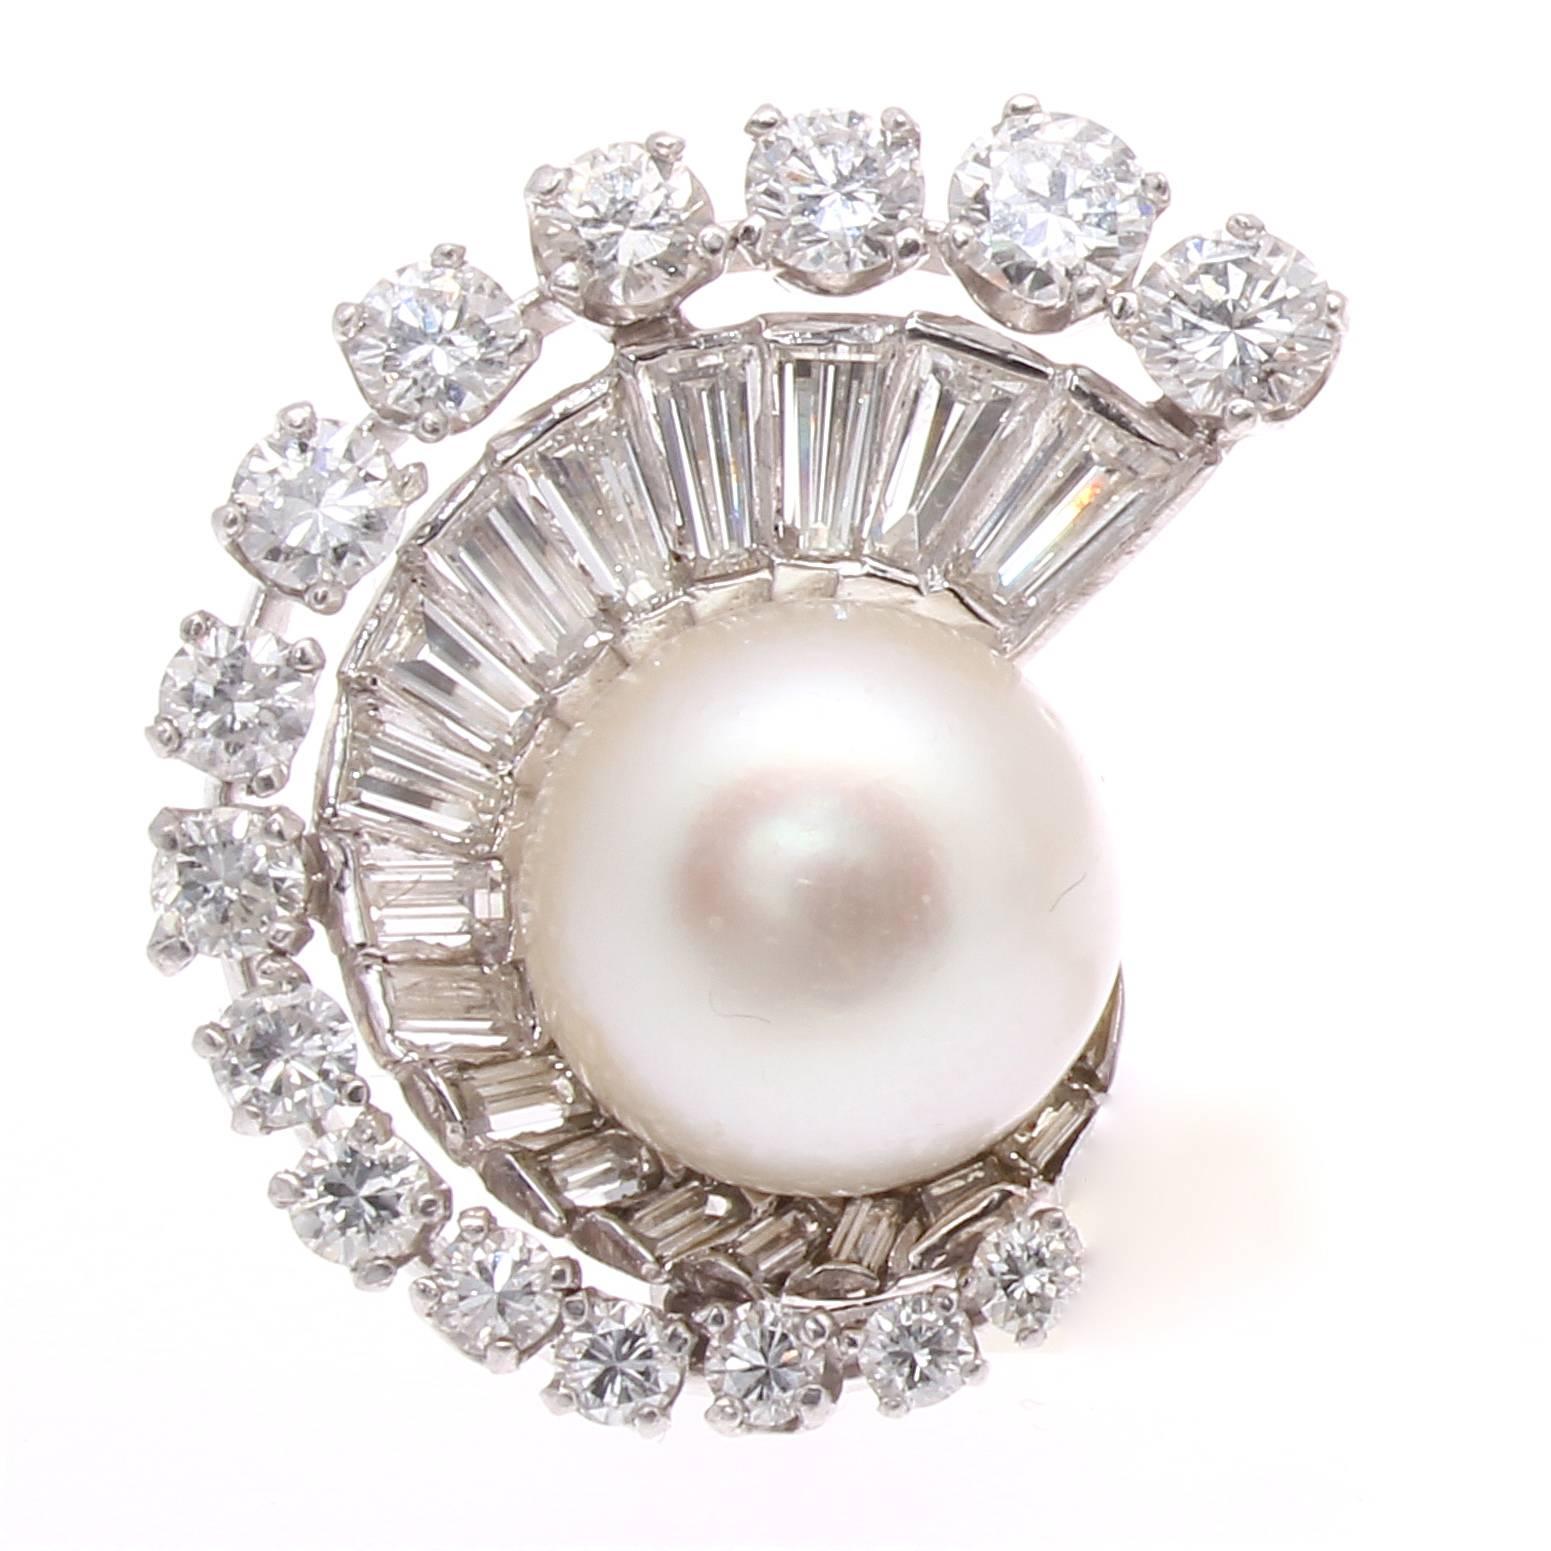 An exquisite art deco creation that has been developed in a way that features perception of depth through design. Decorated with a single cultured pearl in each earring that is drawn in by the swirling layers of baguette and round cut clean, white